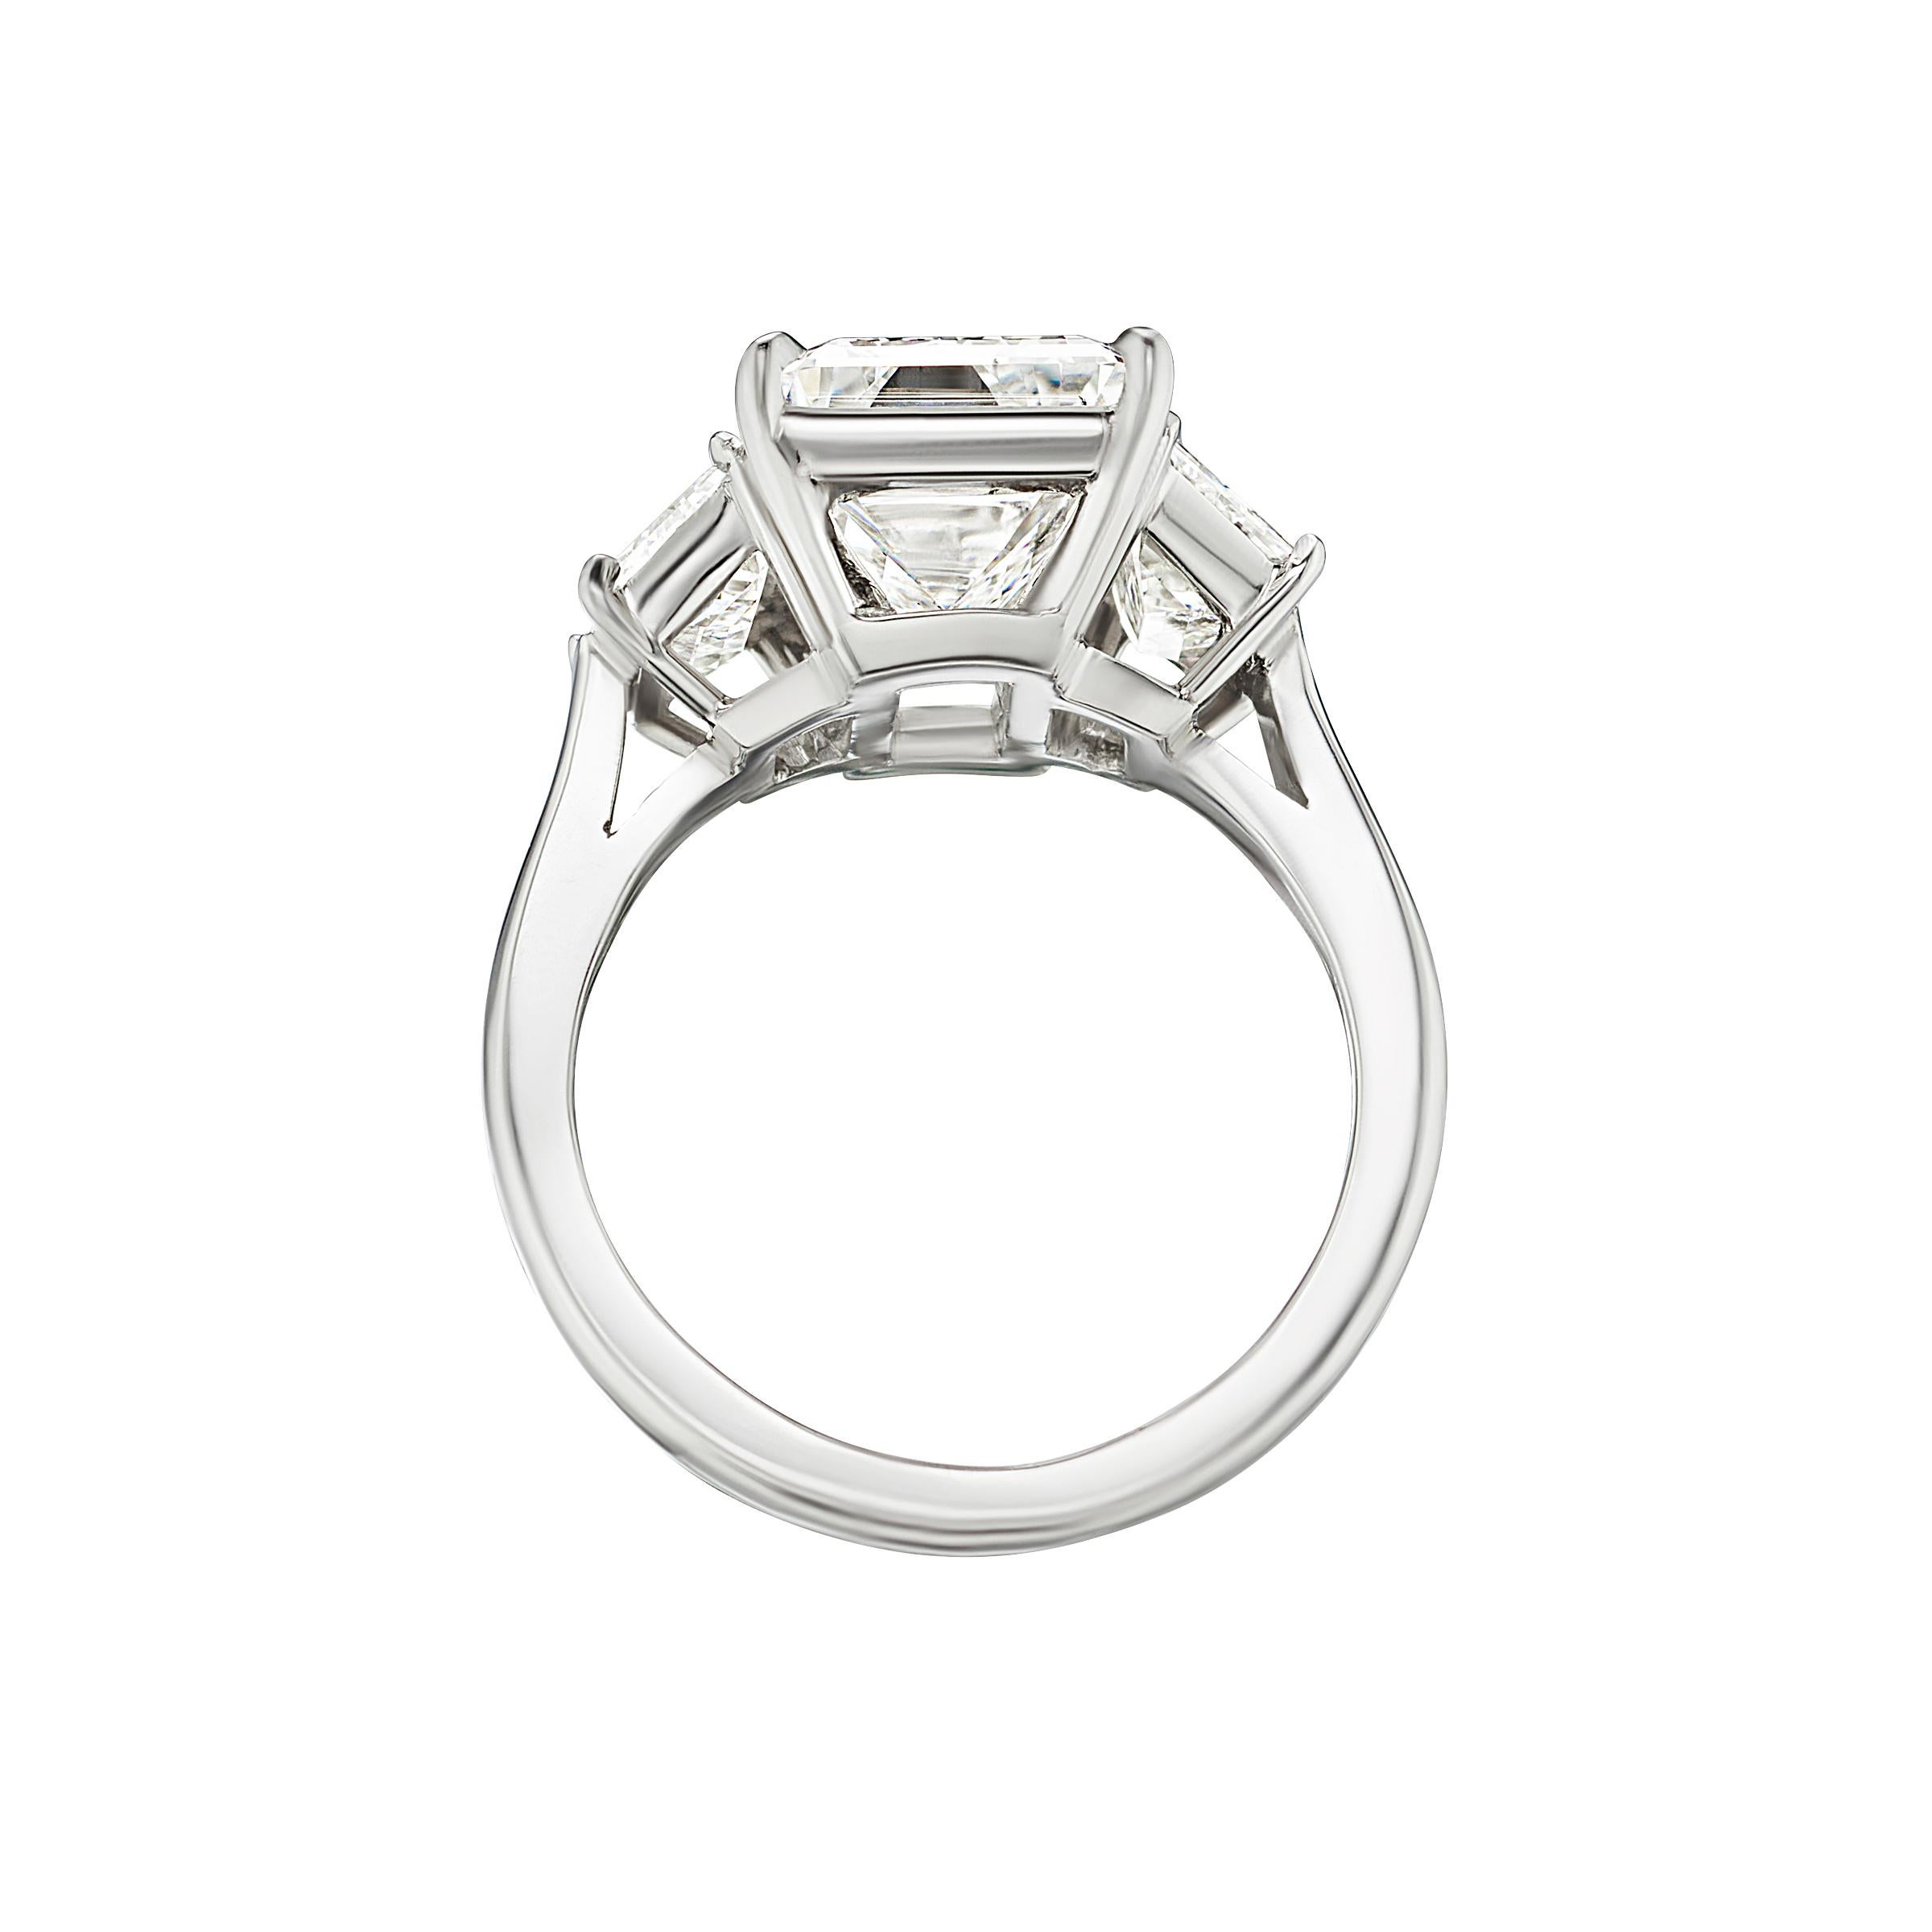 Antinori Fine Jewels is proud to offer this important and impressive 5 carat GIA certified Emerald cut diamond ring.
H color, VS1 clarity, excellent polish, excellent Symmetry and faint fluorescence.

Set in 18 carats white gold mounting.